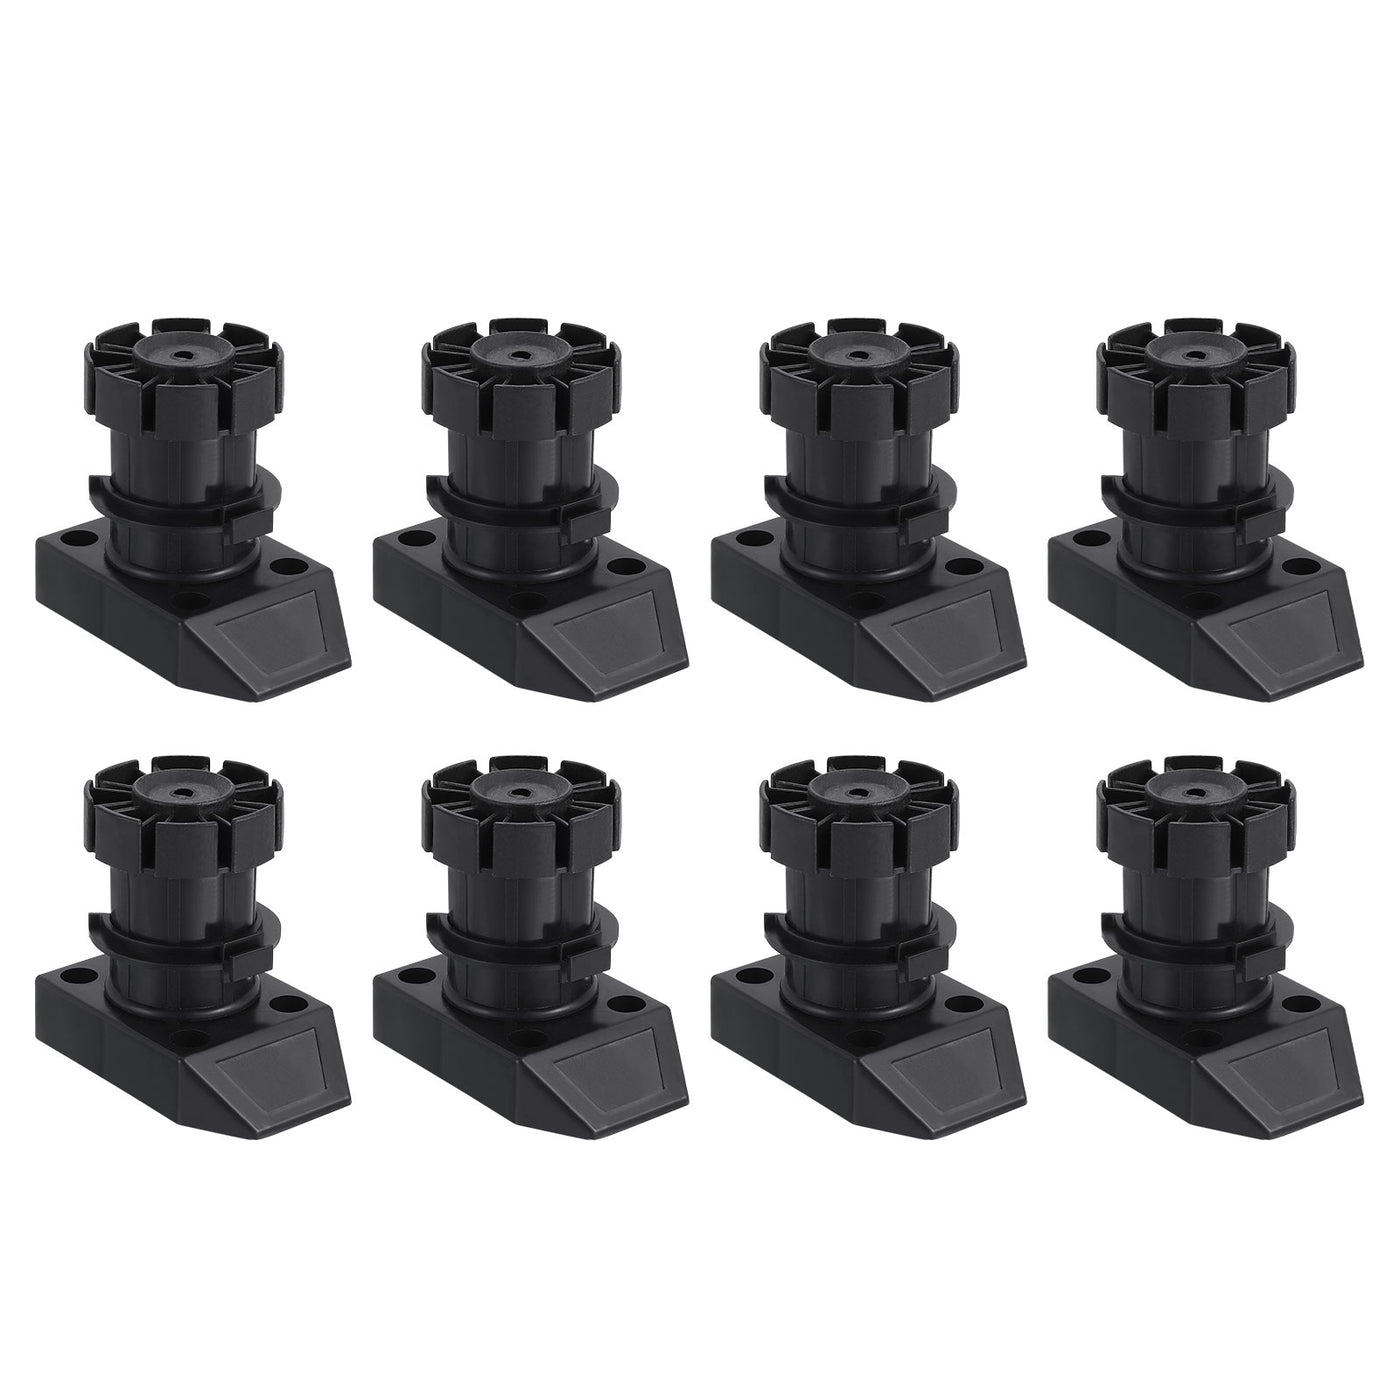 uxcell Uxcell Adjustable Legs, 8Pcs 54 x 80mm - Furniture Leveling Foot, Thick Legs Leveler Support Frame for Bed Sofa Coffee Table Bathroom Cabinet (Black)